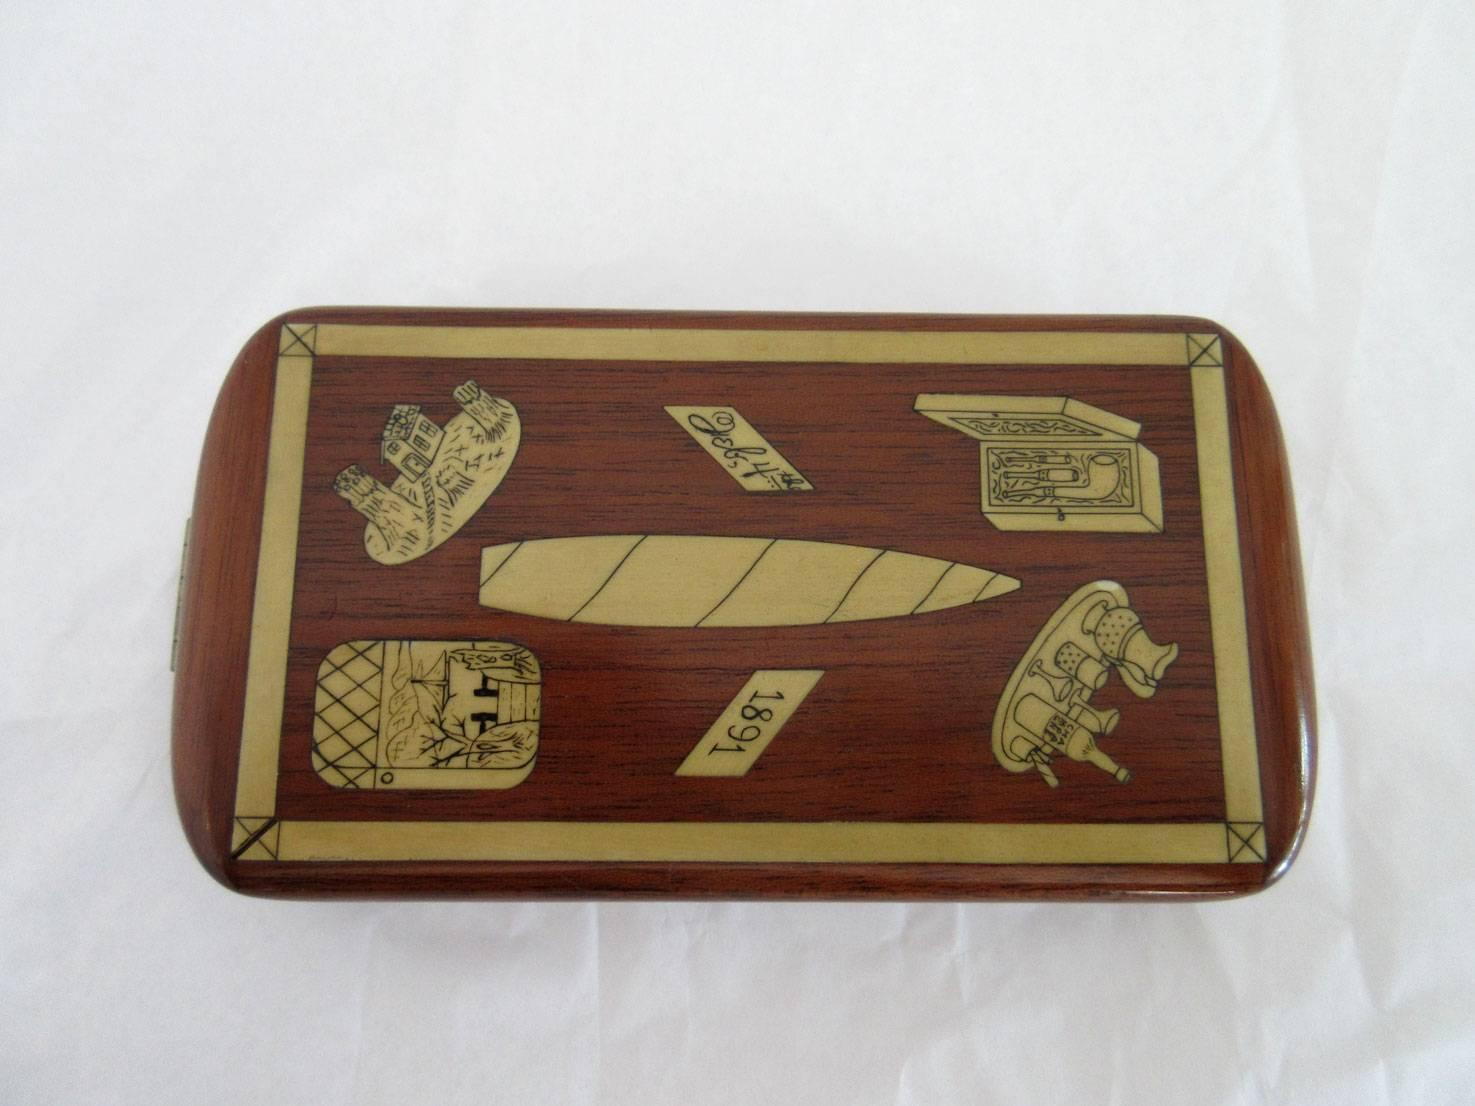 Vintage French Art Deco cigarette case with various toiletrie motifs on both sides. It is inlaid wood. This case features the original fabric.